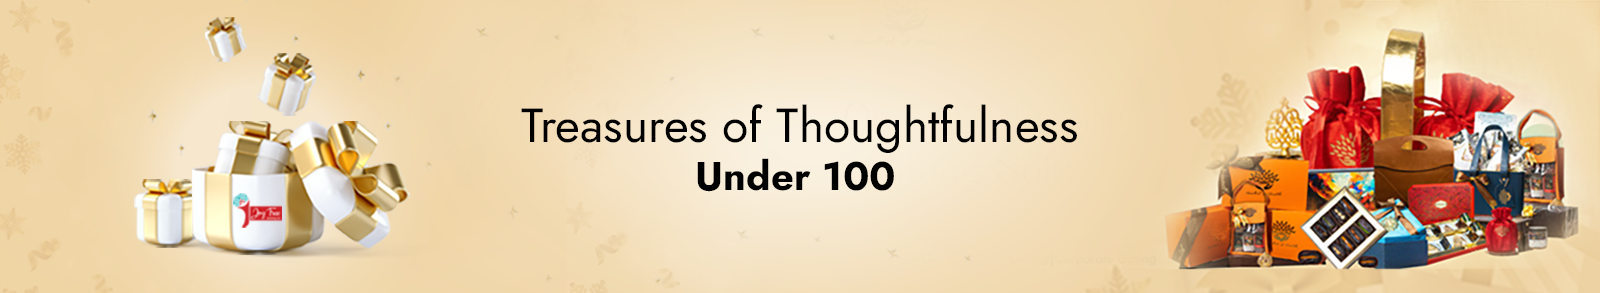 Treasures of Thoughtfulness, Under 100